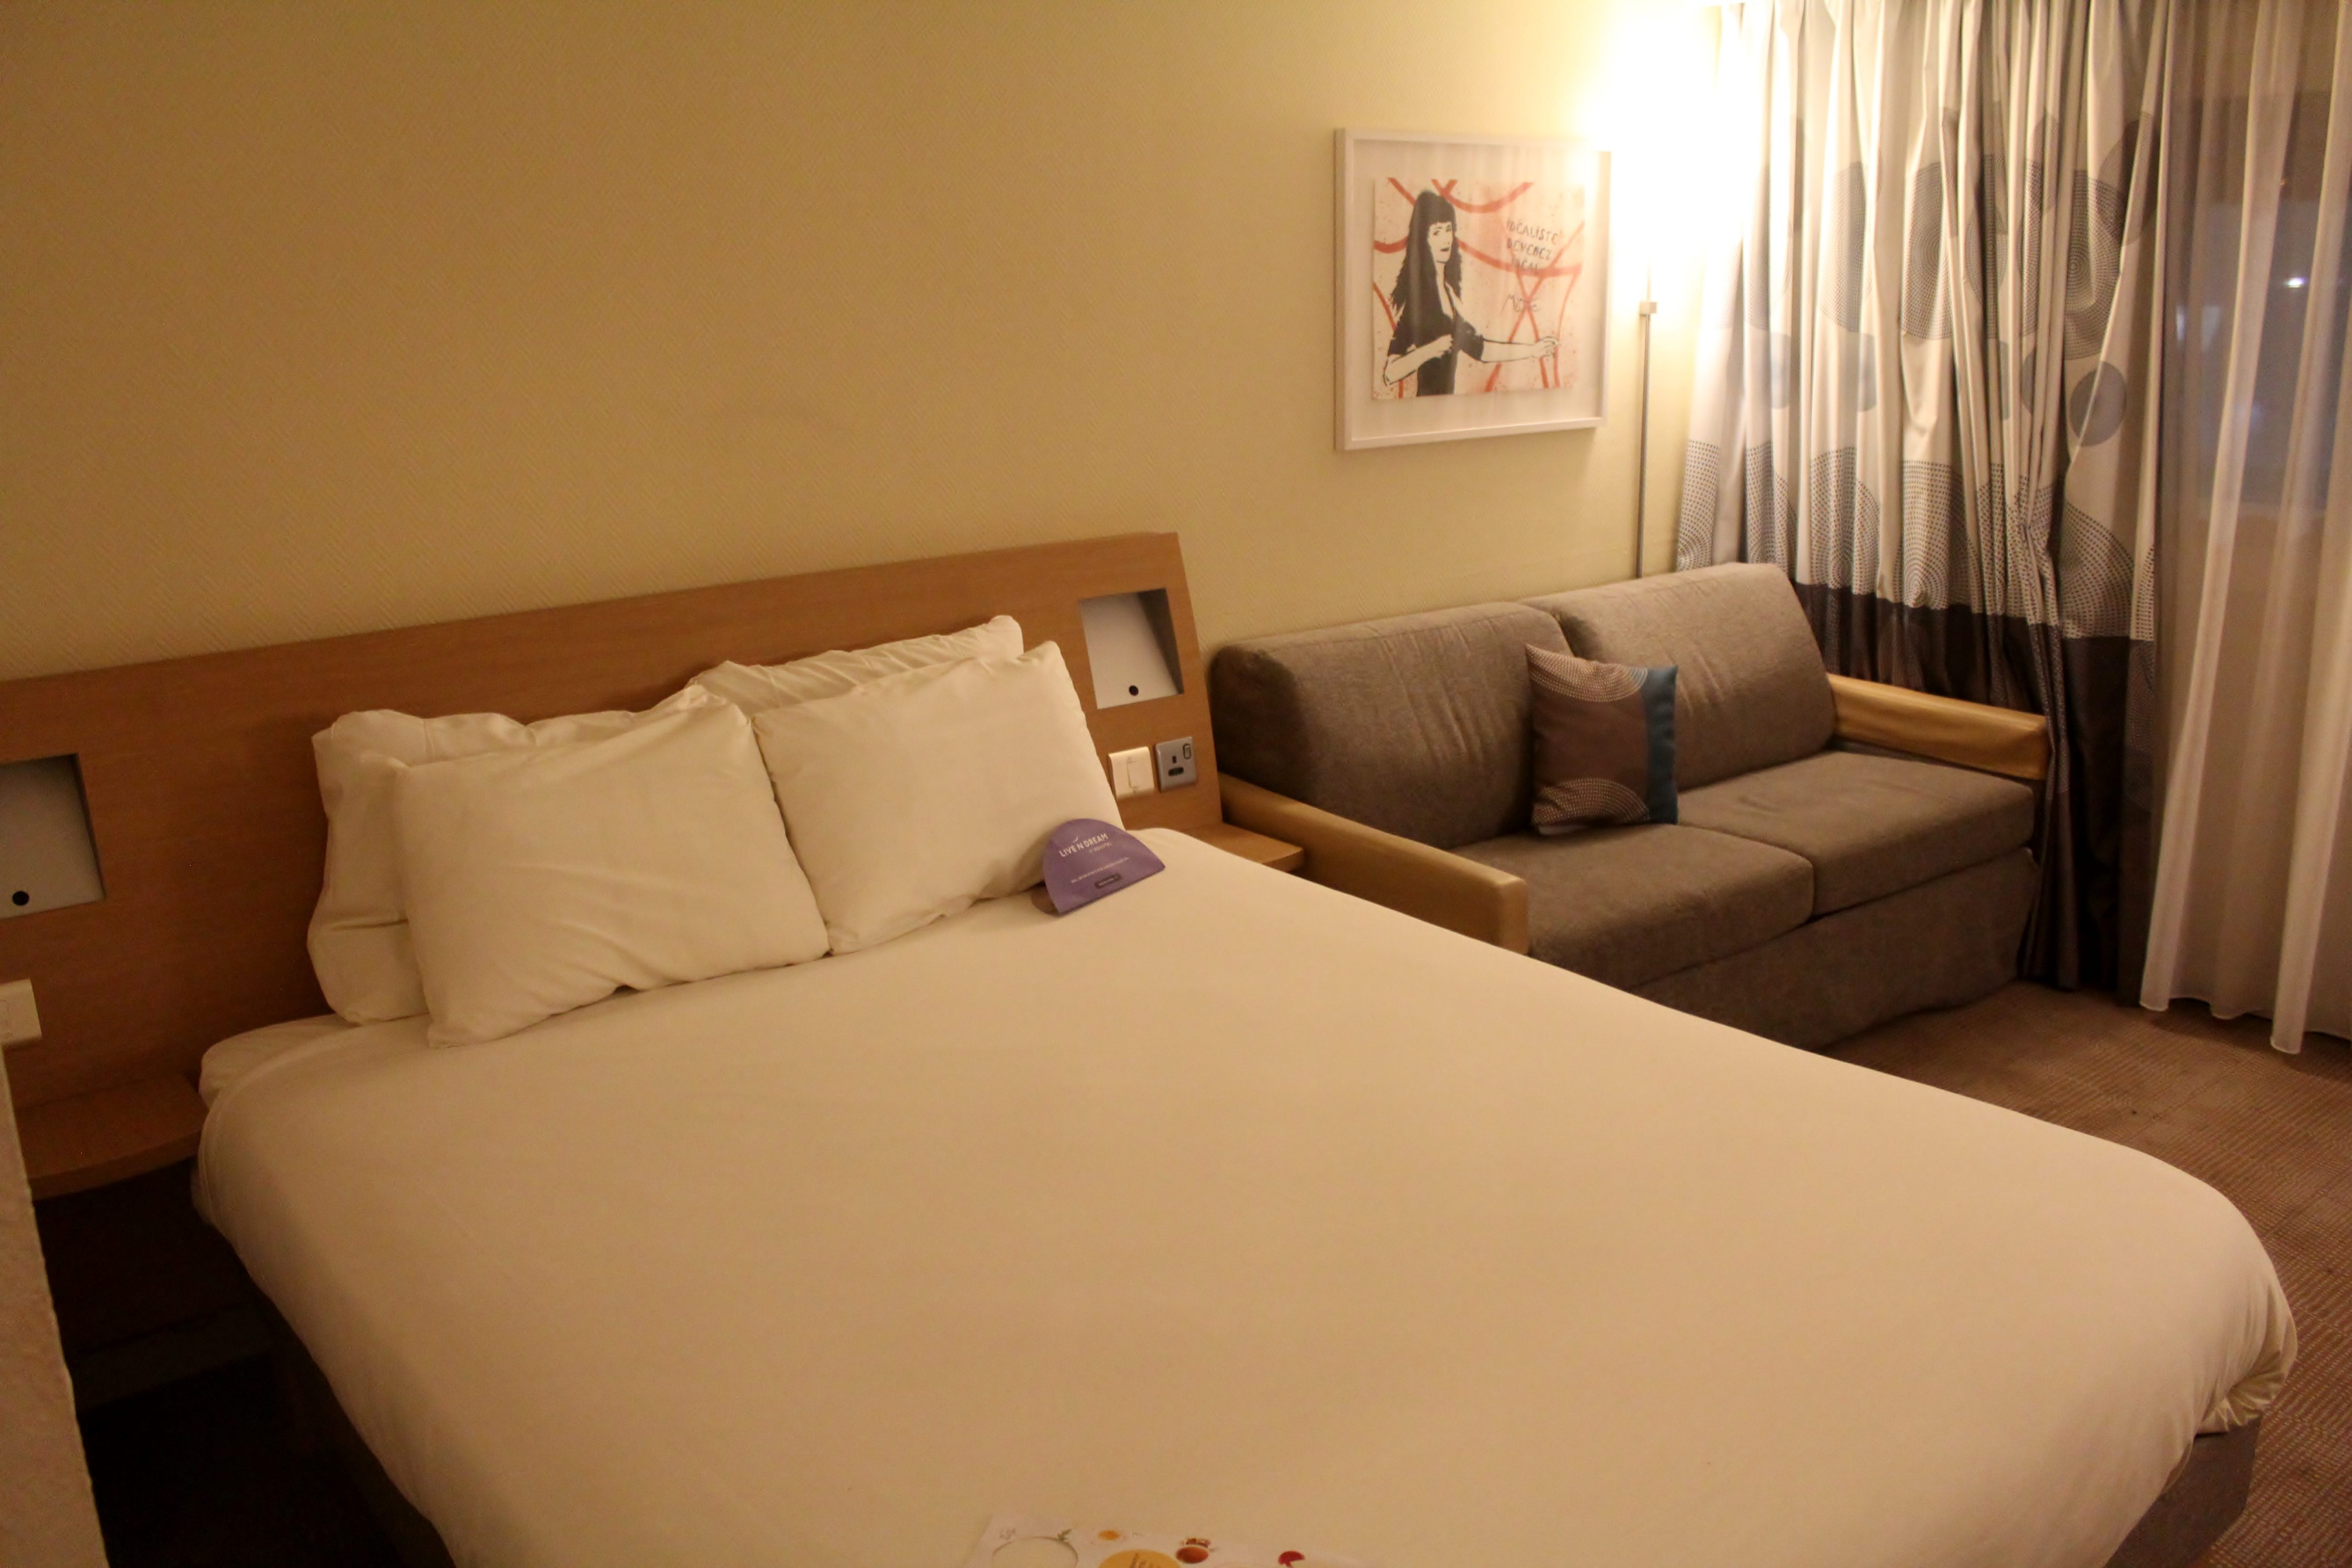 Novotel Hotel Birmingham Airport – Hotel Review - Globalmouse Travels